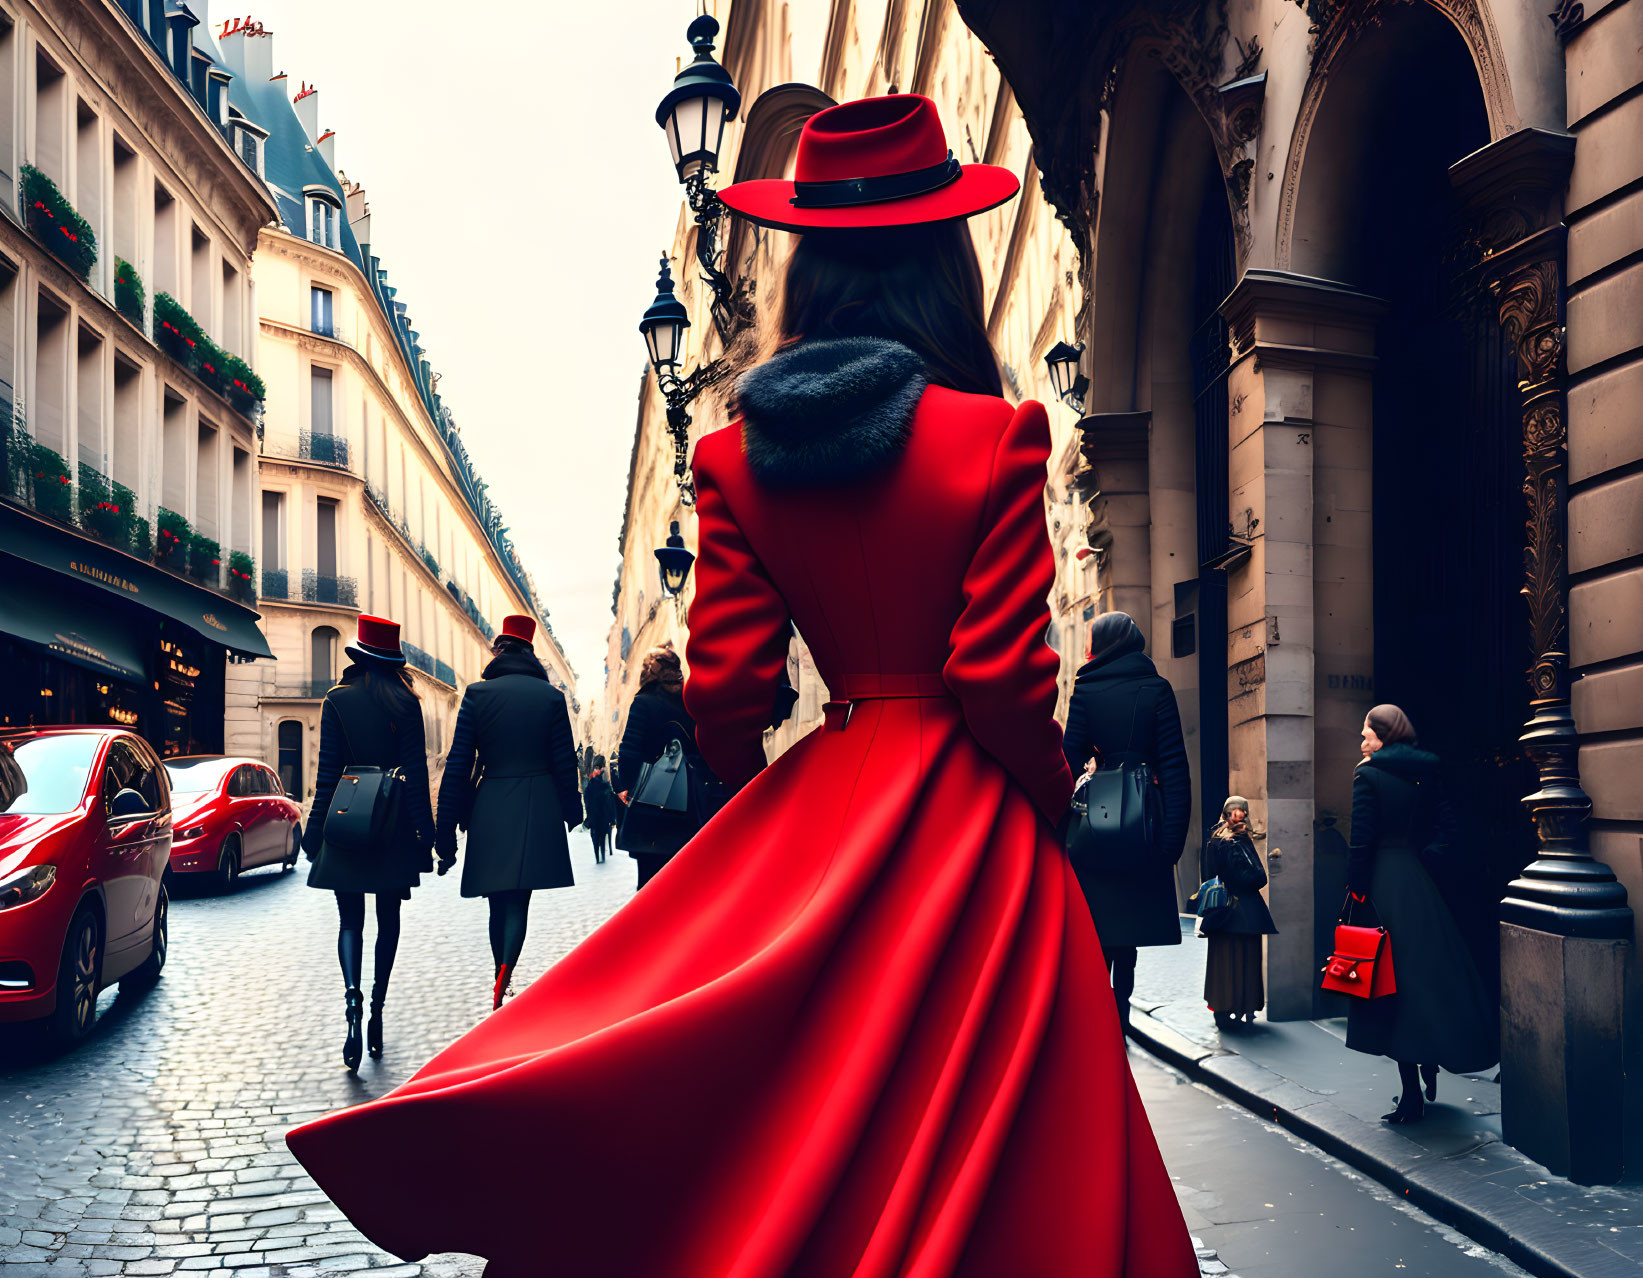 Fashionable woman in red coat and wide-brimmed hat strolling city street with classic architecture.